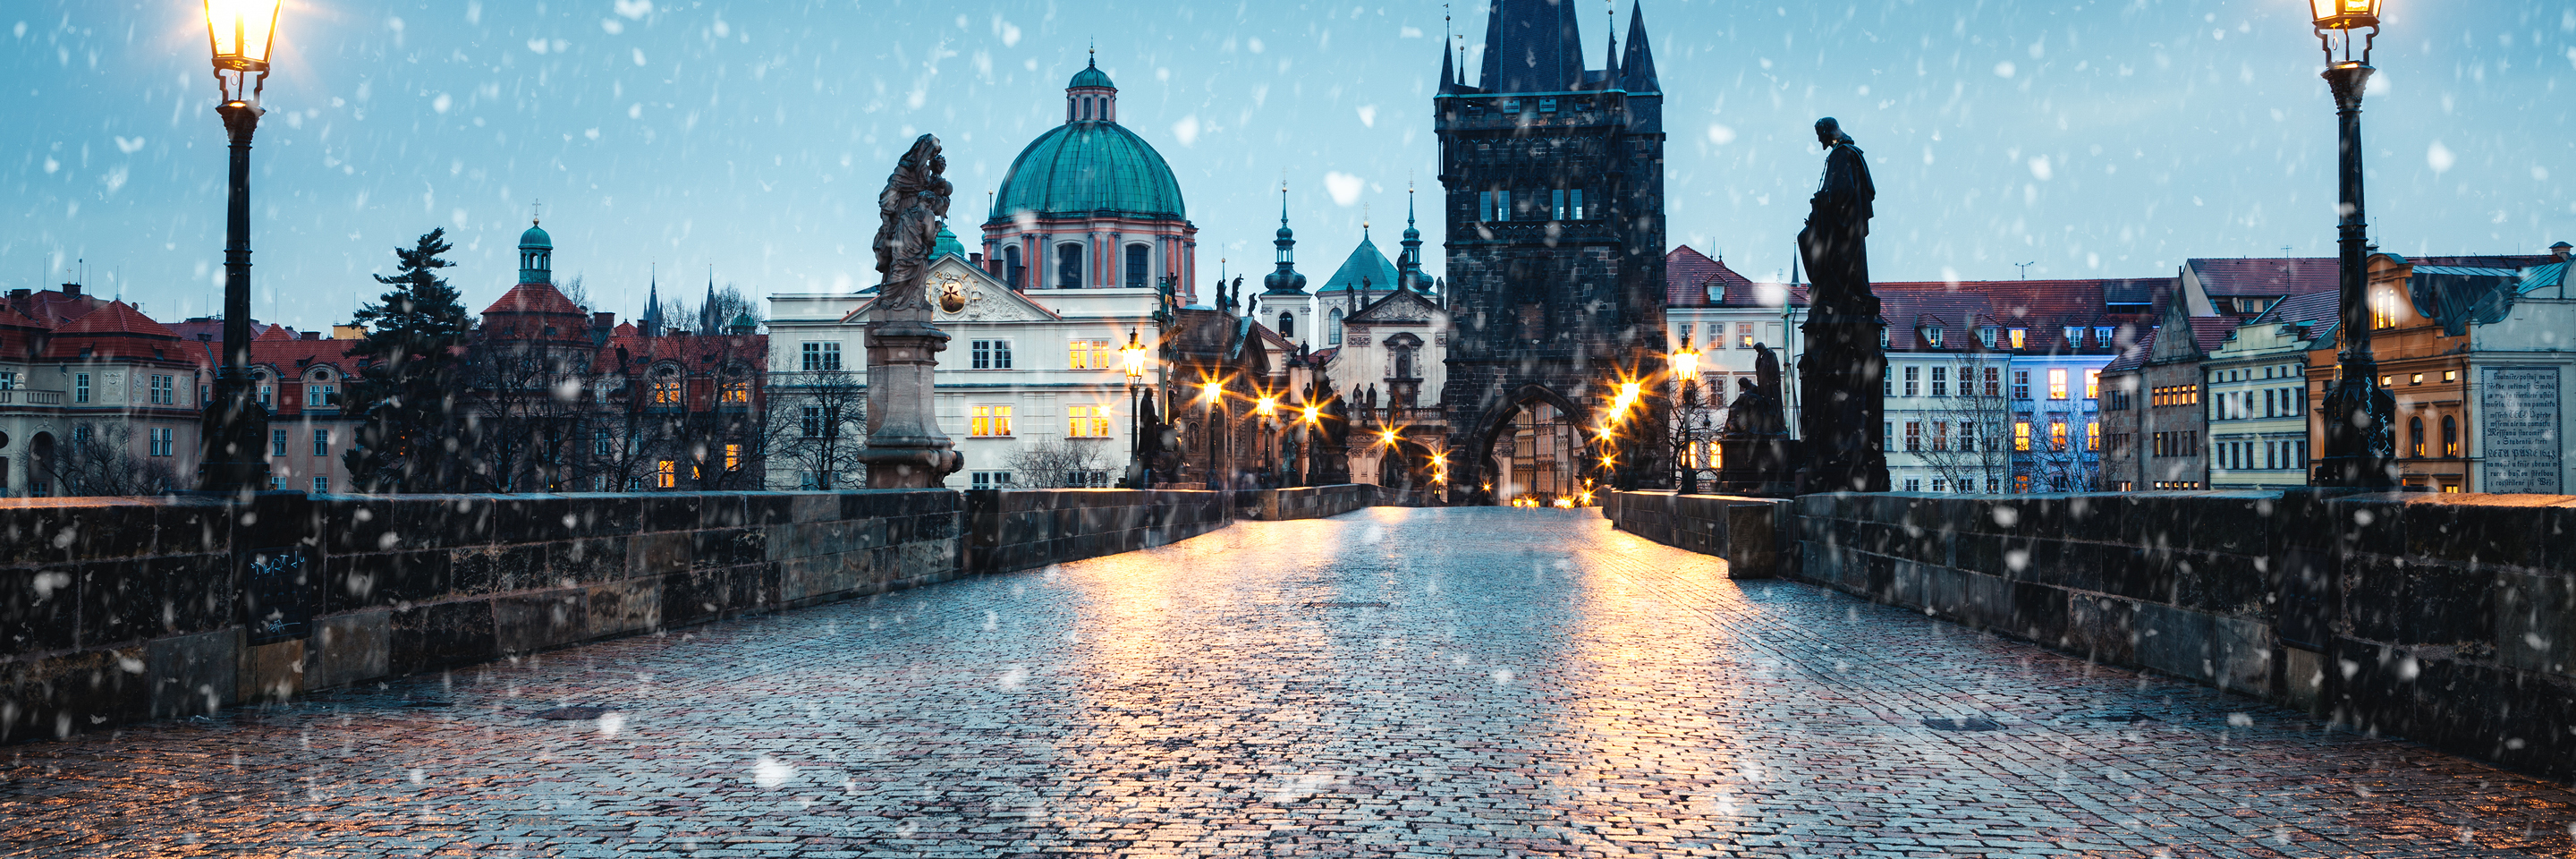 Festive Season on the Blue Danube Discovery with 2 Nights in Prague